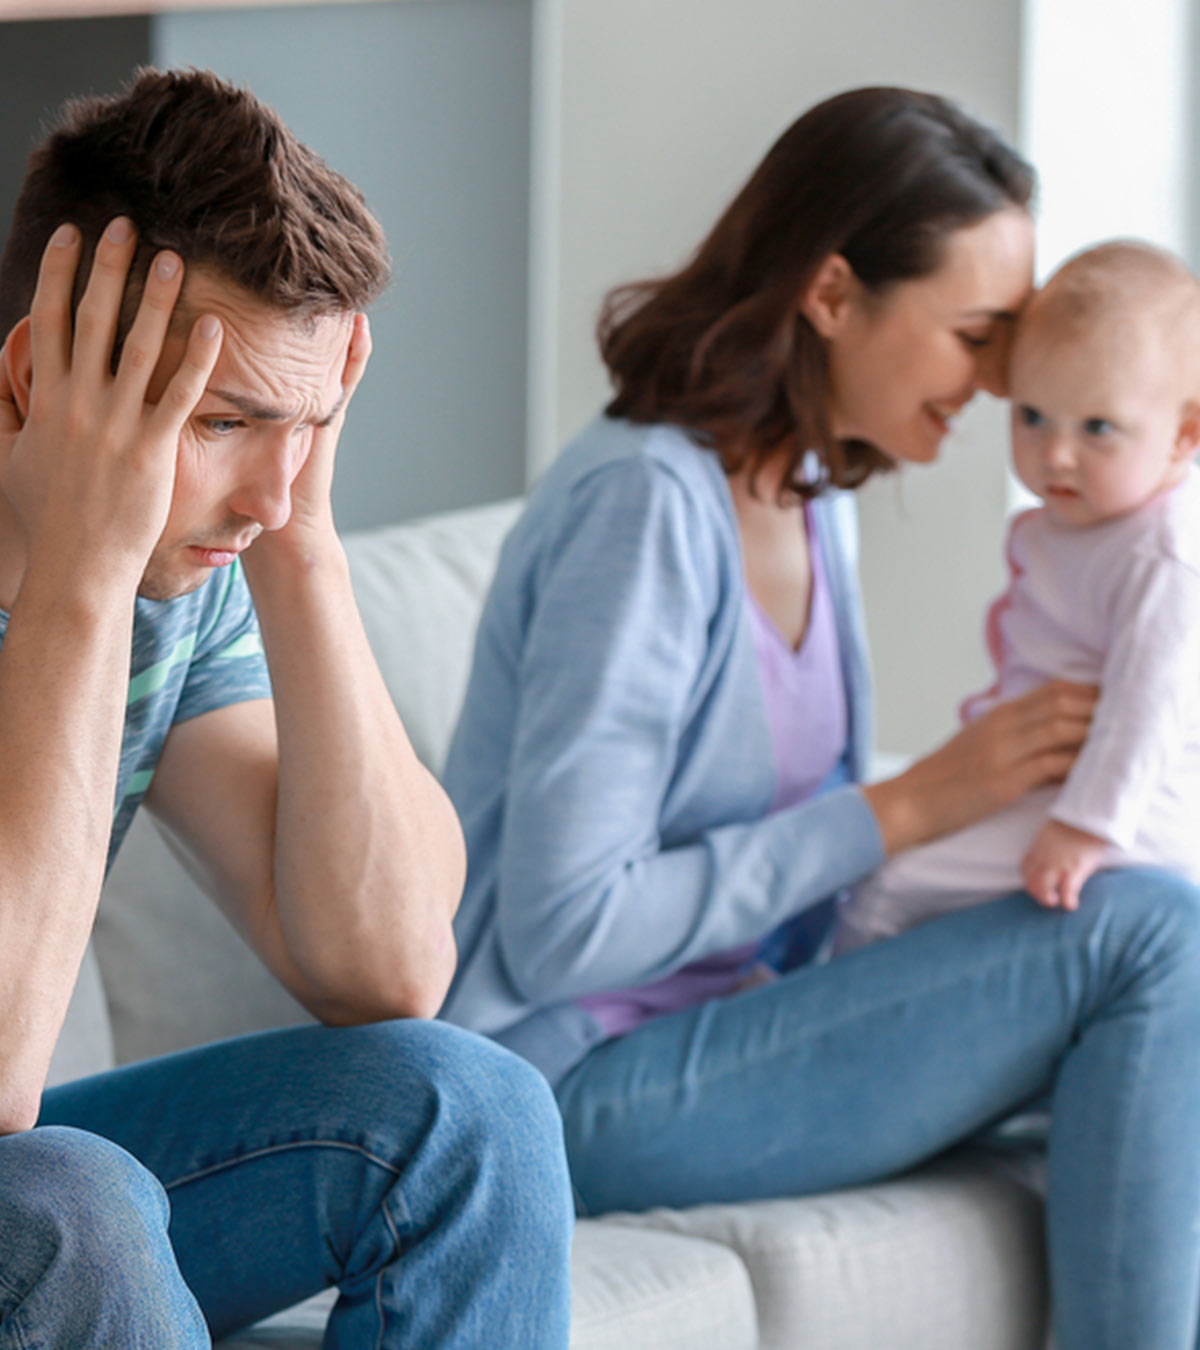 Dads Can Get Depressed Too, All You Need to Know About Paternal Postpartum Depression